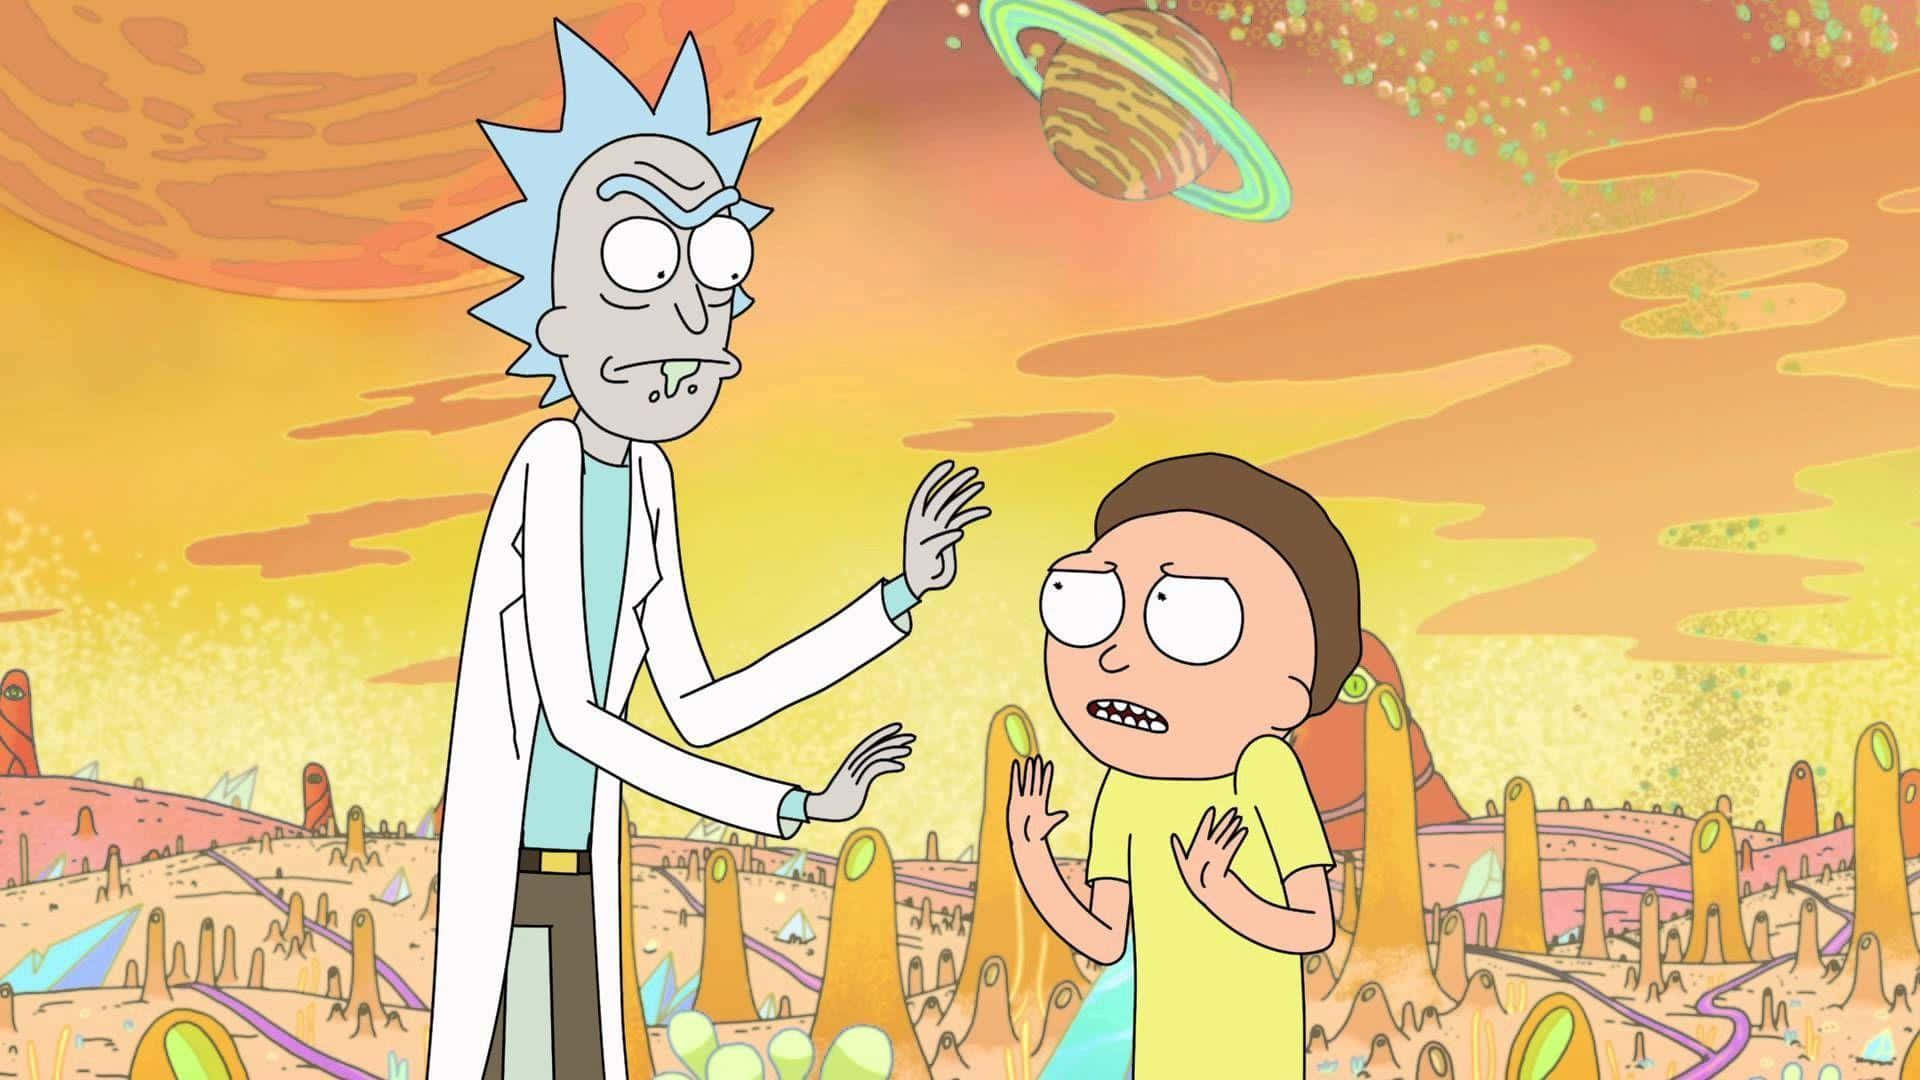 Get your fill of adventure with Rick and Morty Backwoods Wallpaper